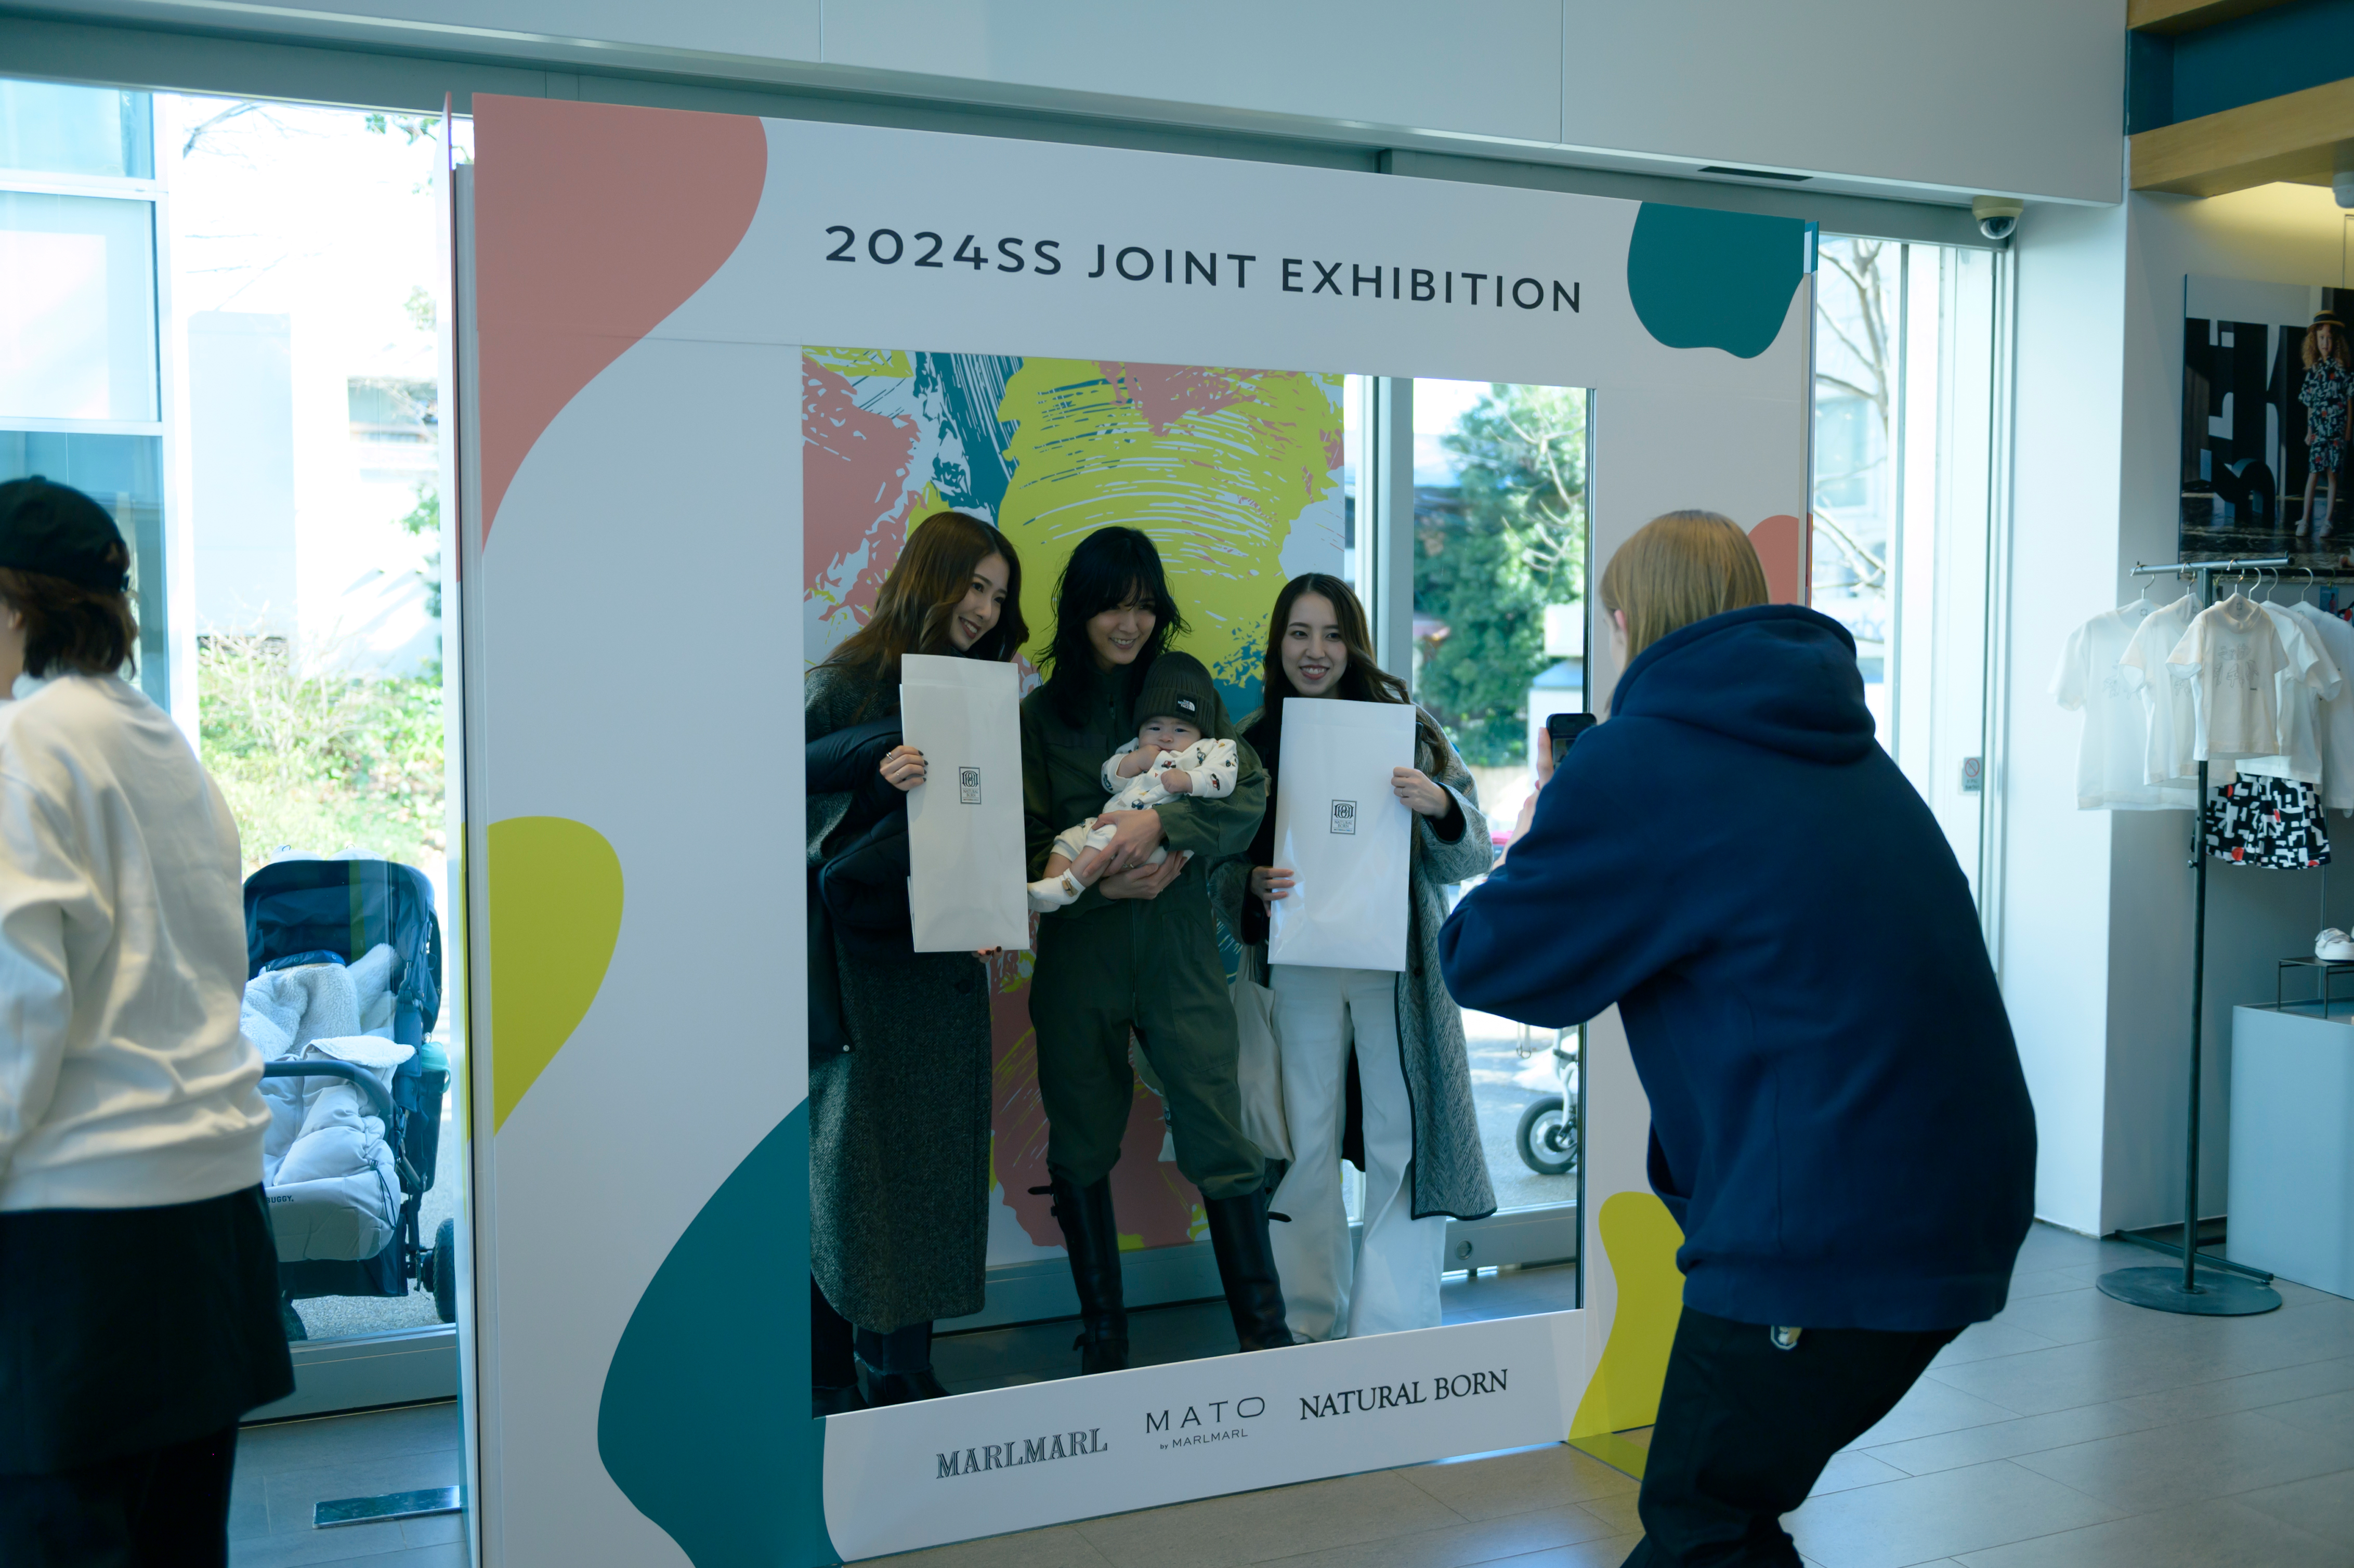 【Event Report】24SS JOINT EXHIBITION